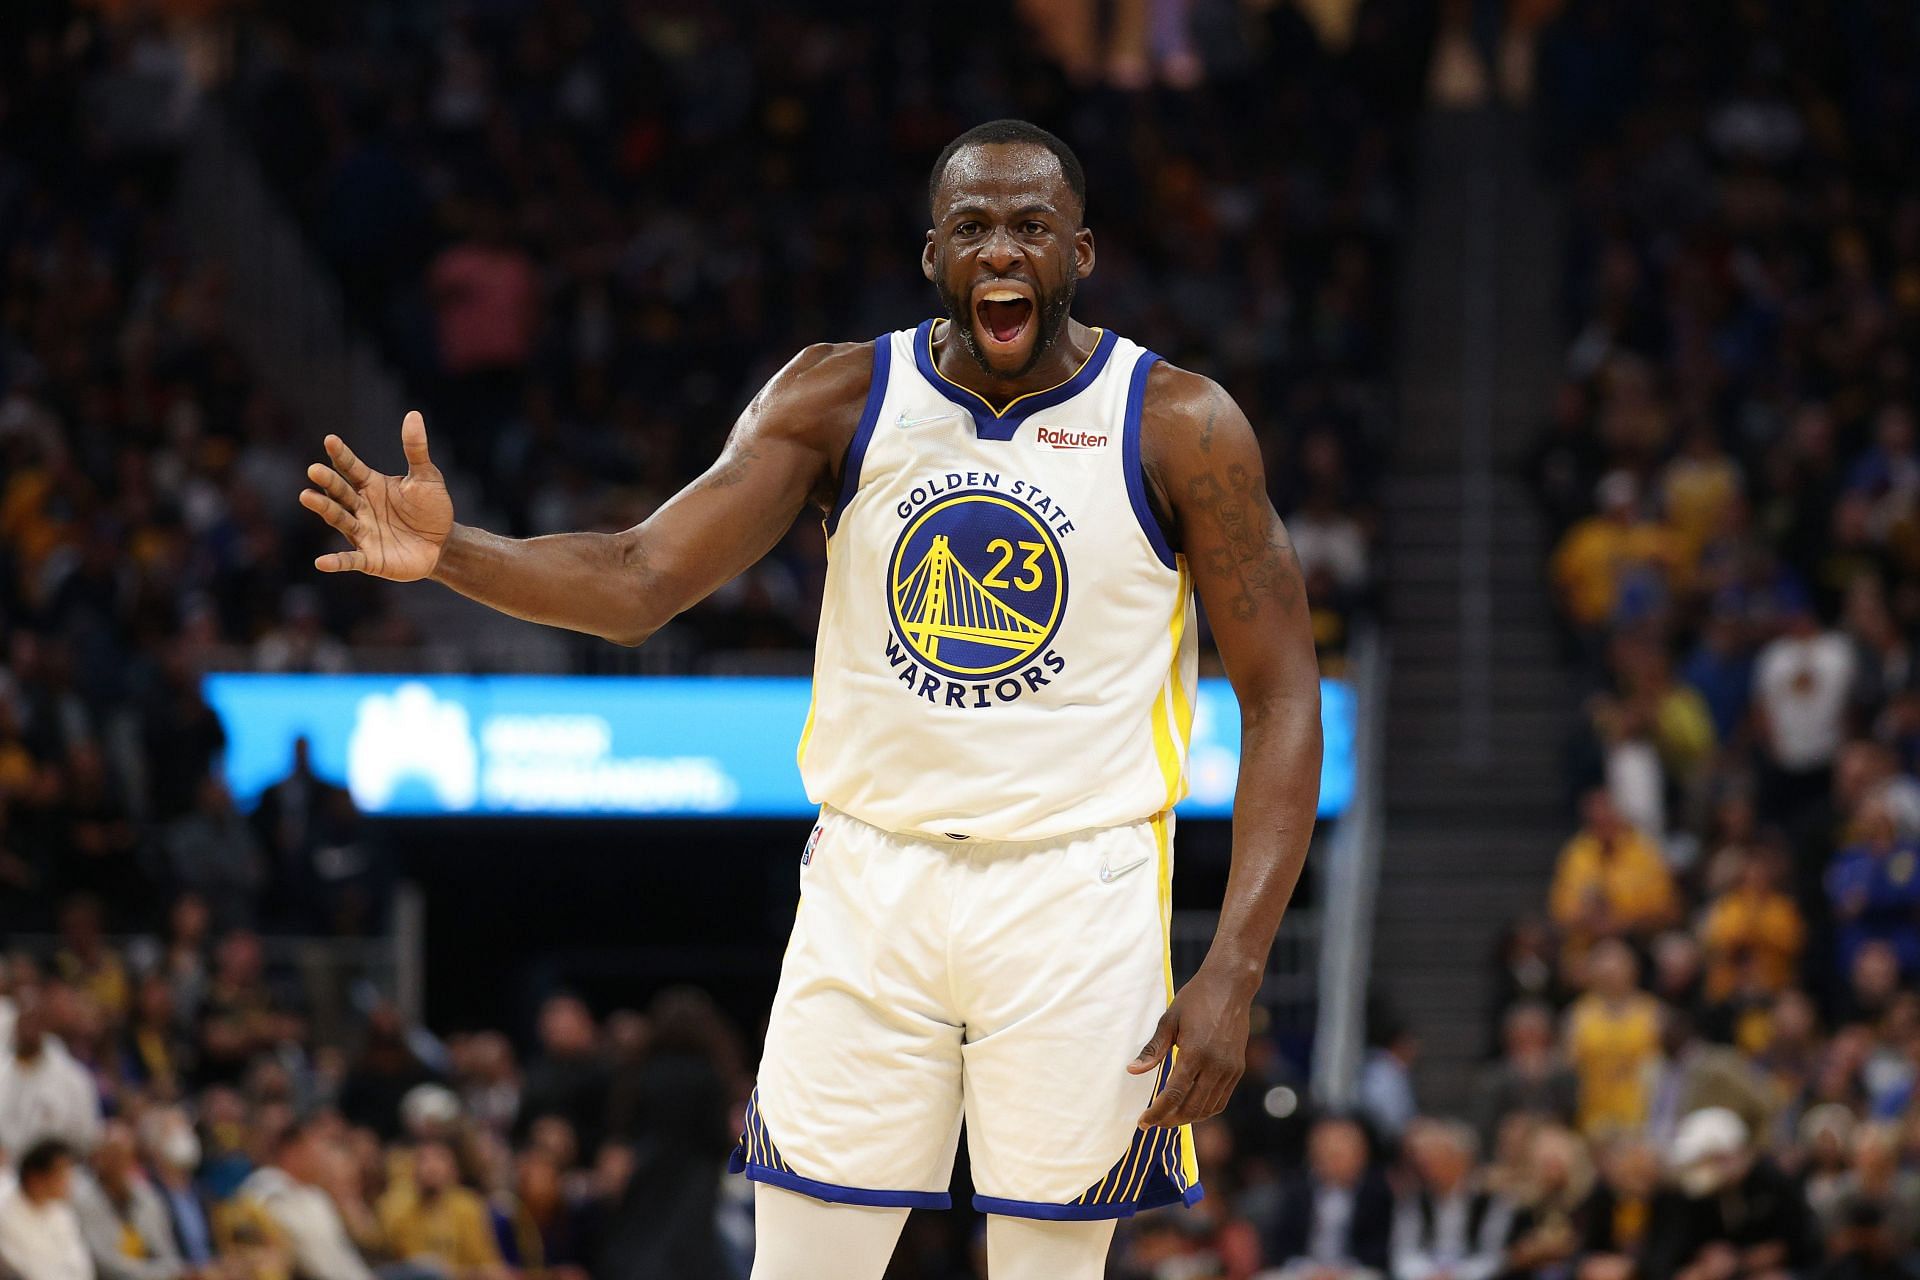 Golden State Warriors stuggled for the first three quarters against the Memphis Grizzlies, but came to their best down the stretch to grab a win